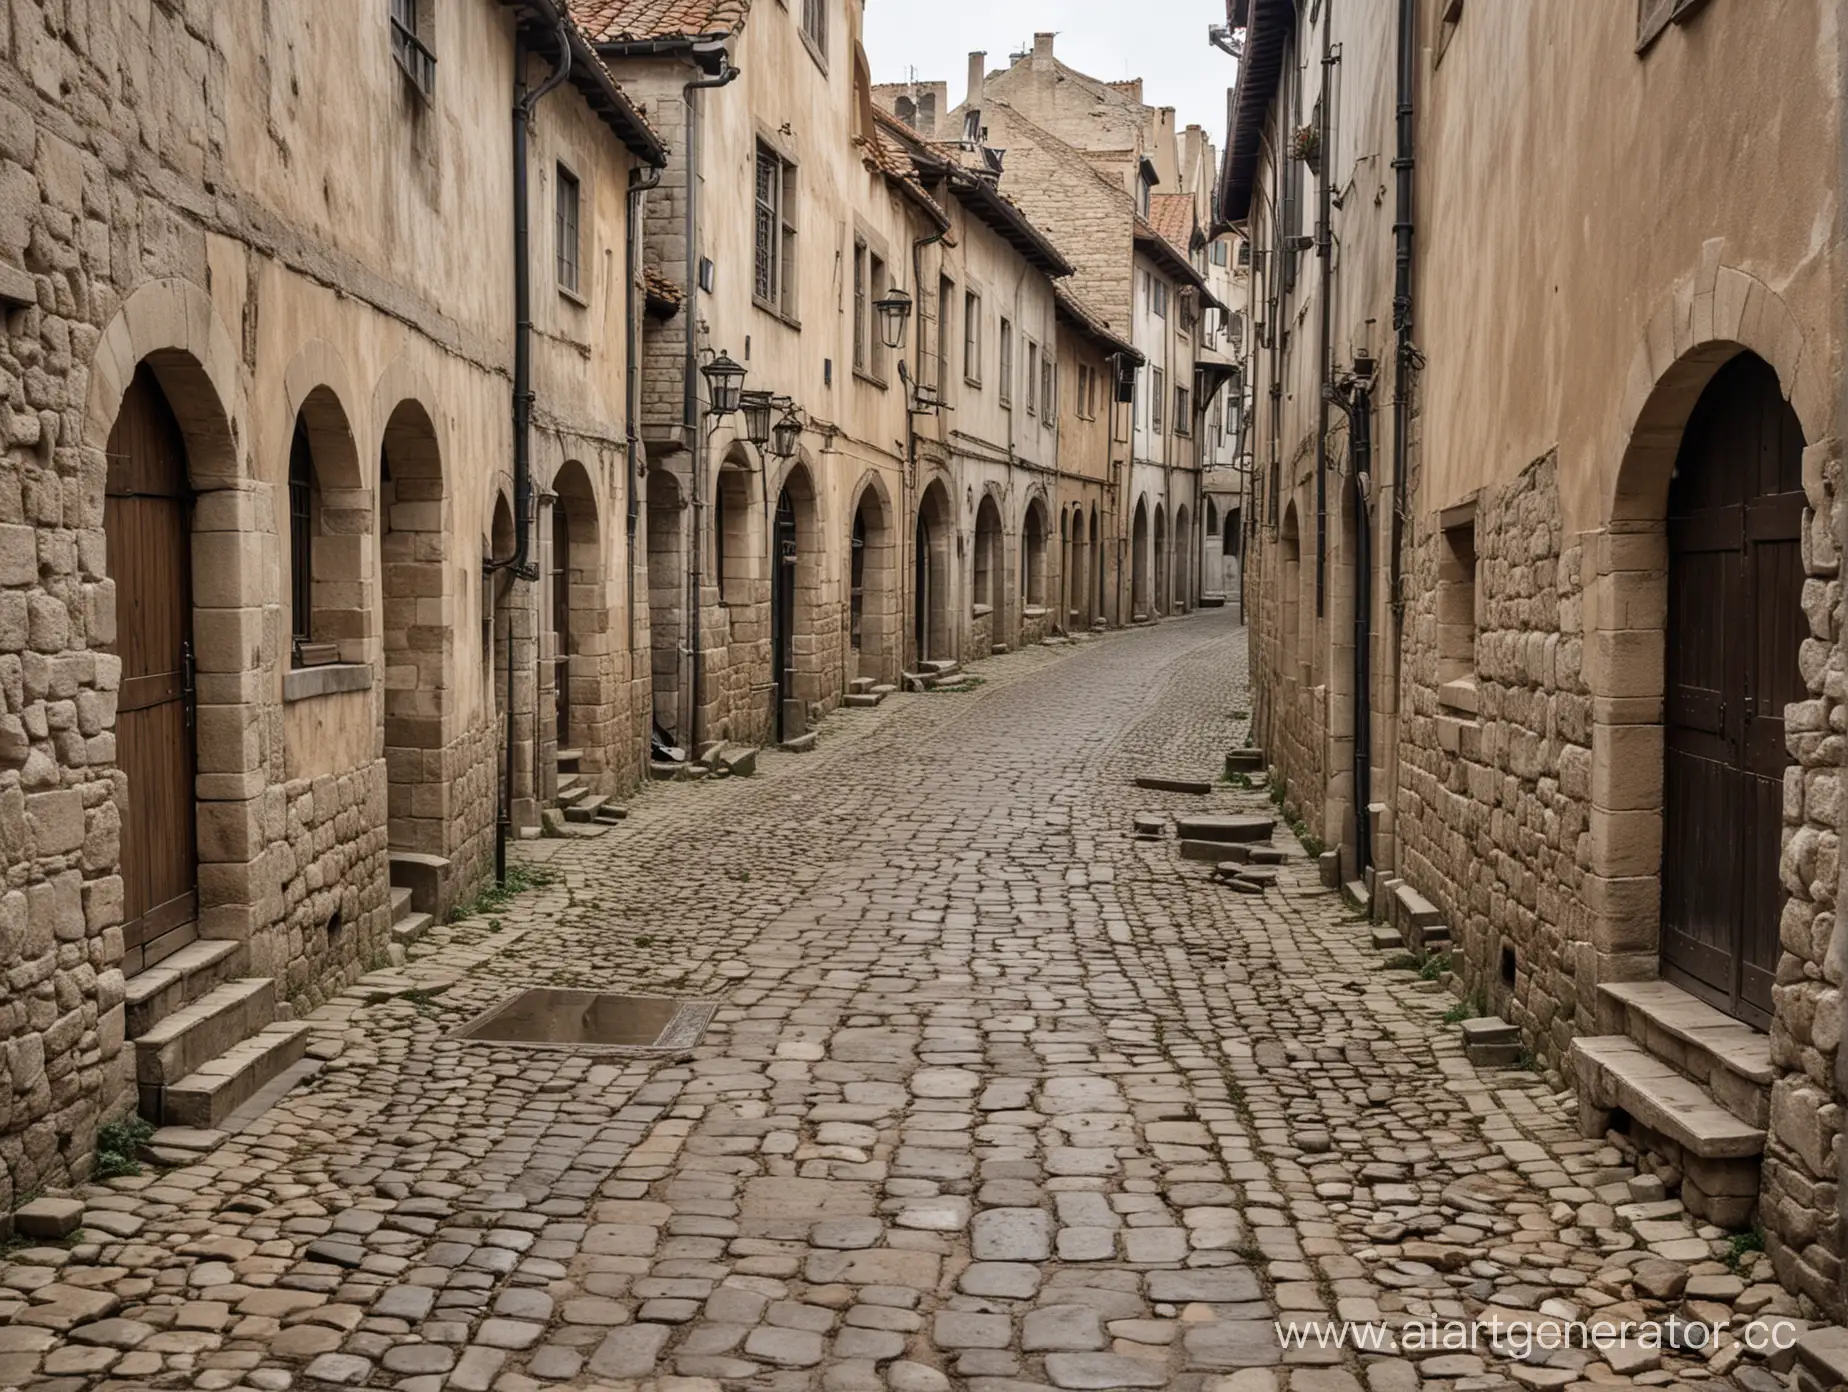 Medieval-Street-in-Very-Bad-Condition-Dilapidated-Urban-Scene